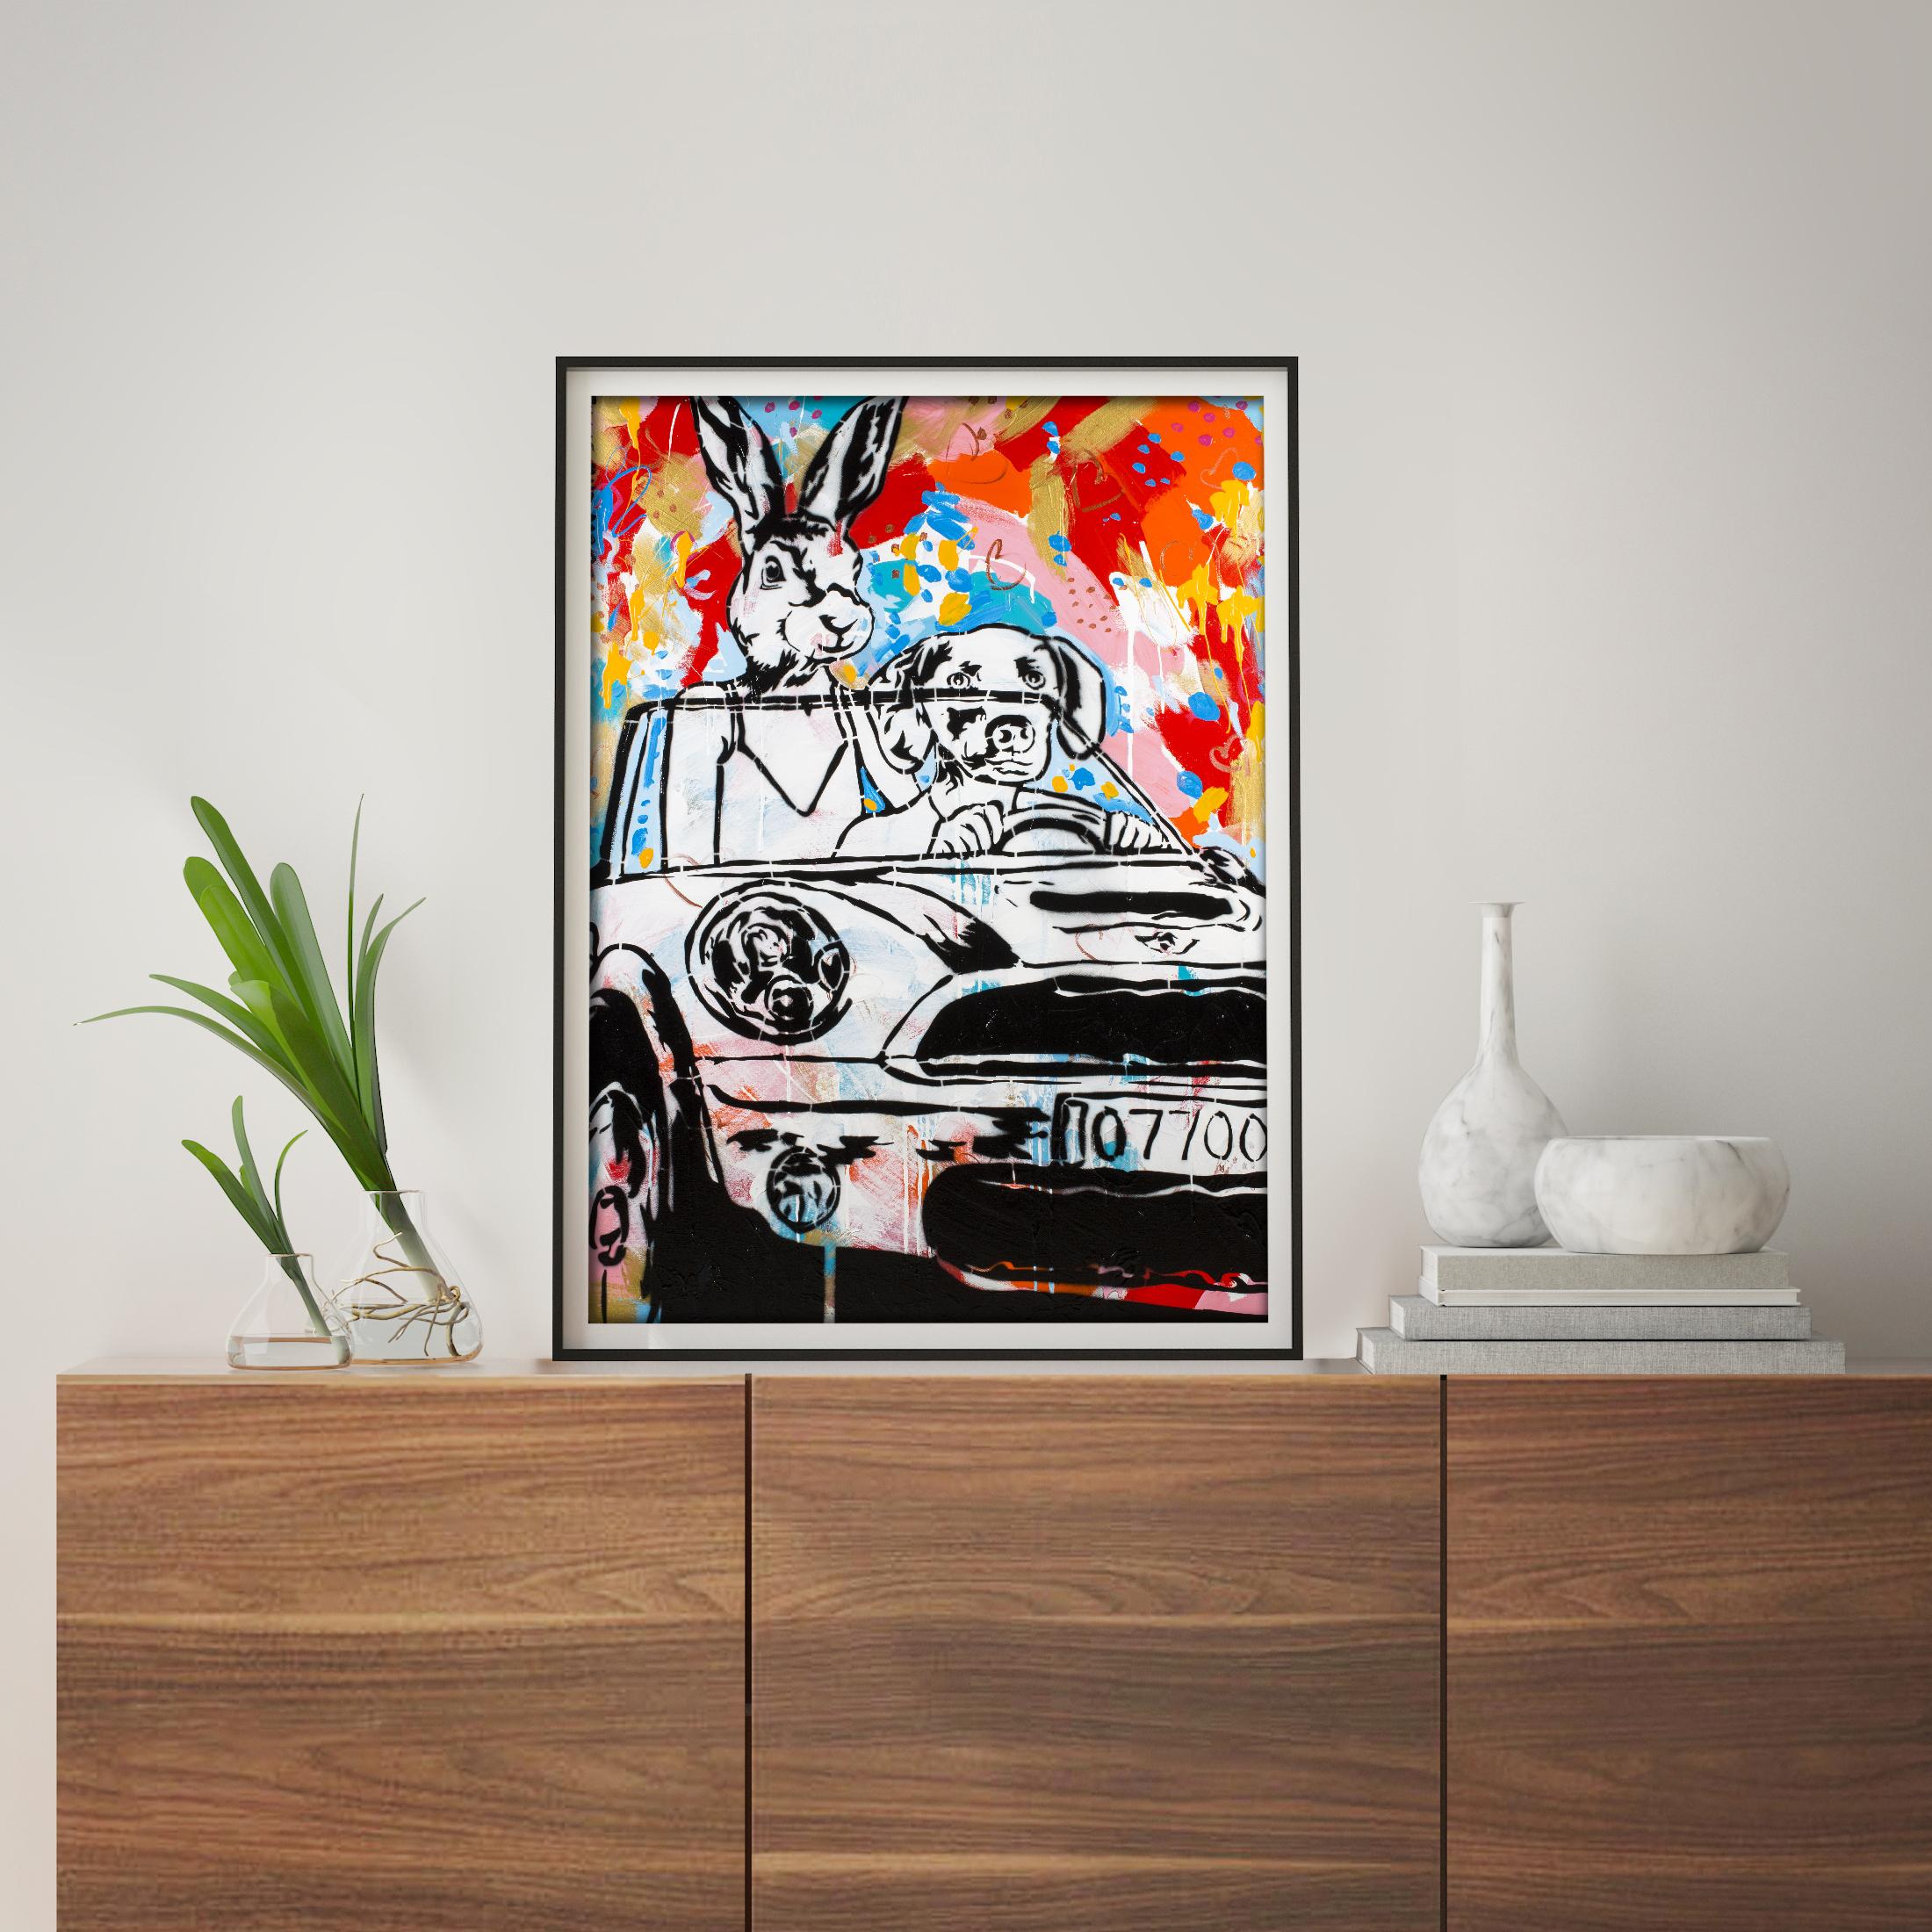 Pop Art - Animal Print - Gillie and Marc - Limited Edition -They loved driving - Beige Figurative Print by Gillie and Marc Schattner